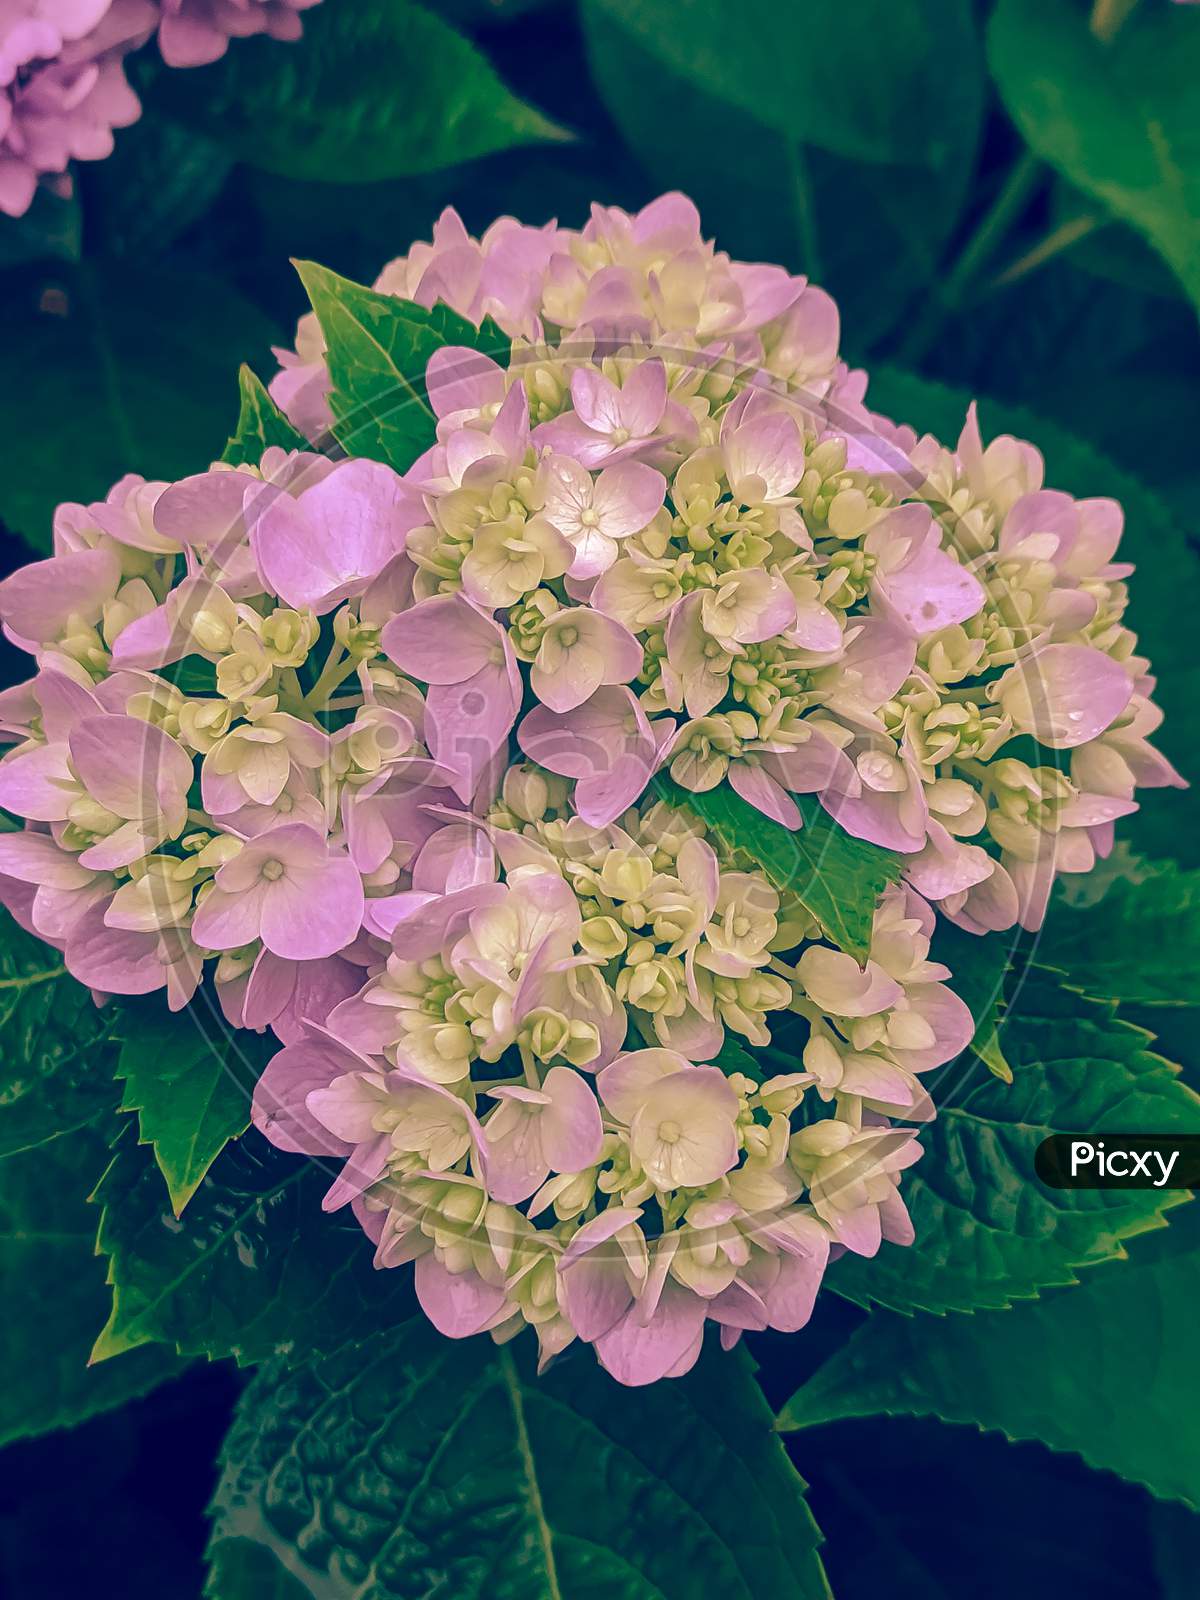 Pink×Remove Flowering plant×Remove Plant×Remove Flower×Remove Cornales×Remove Petal×Remove Hydrangeaceae